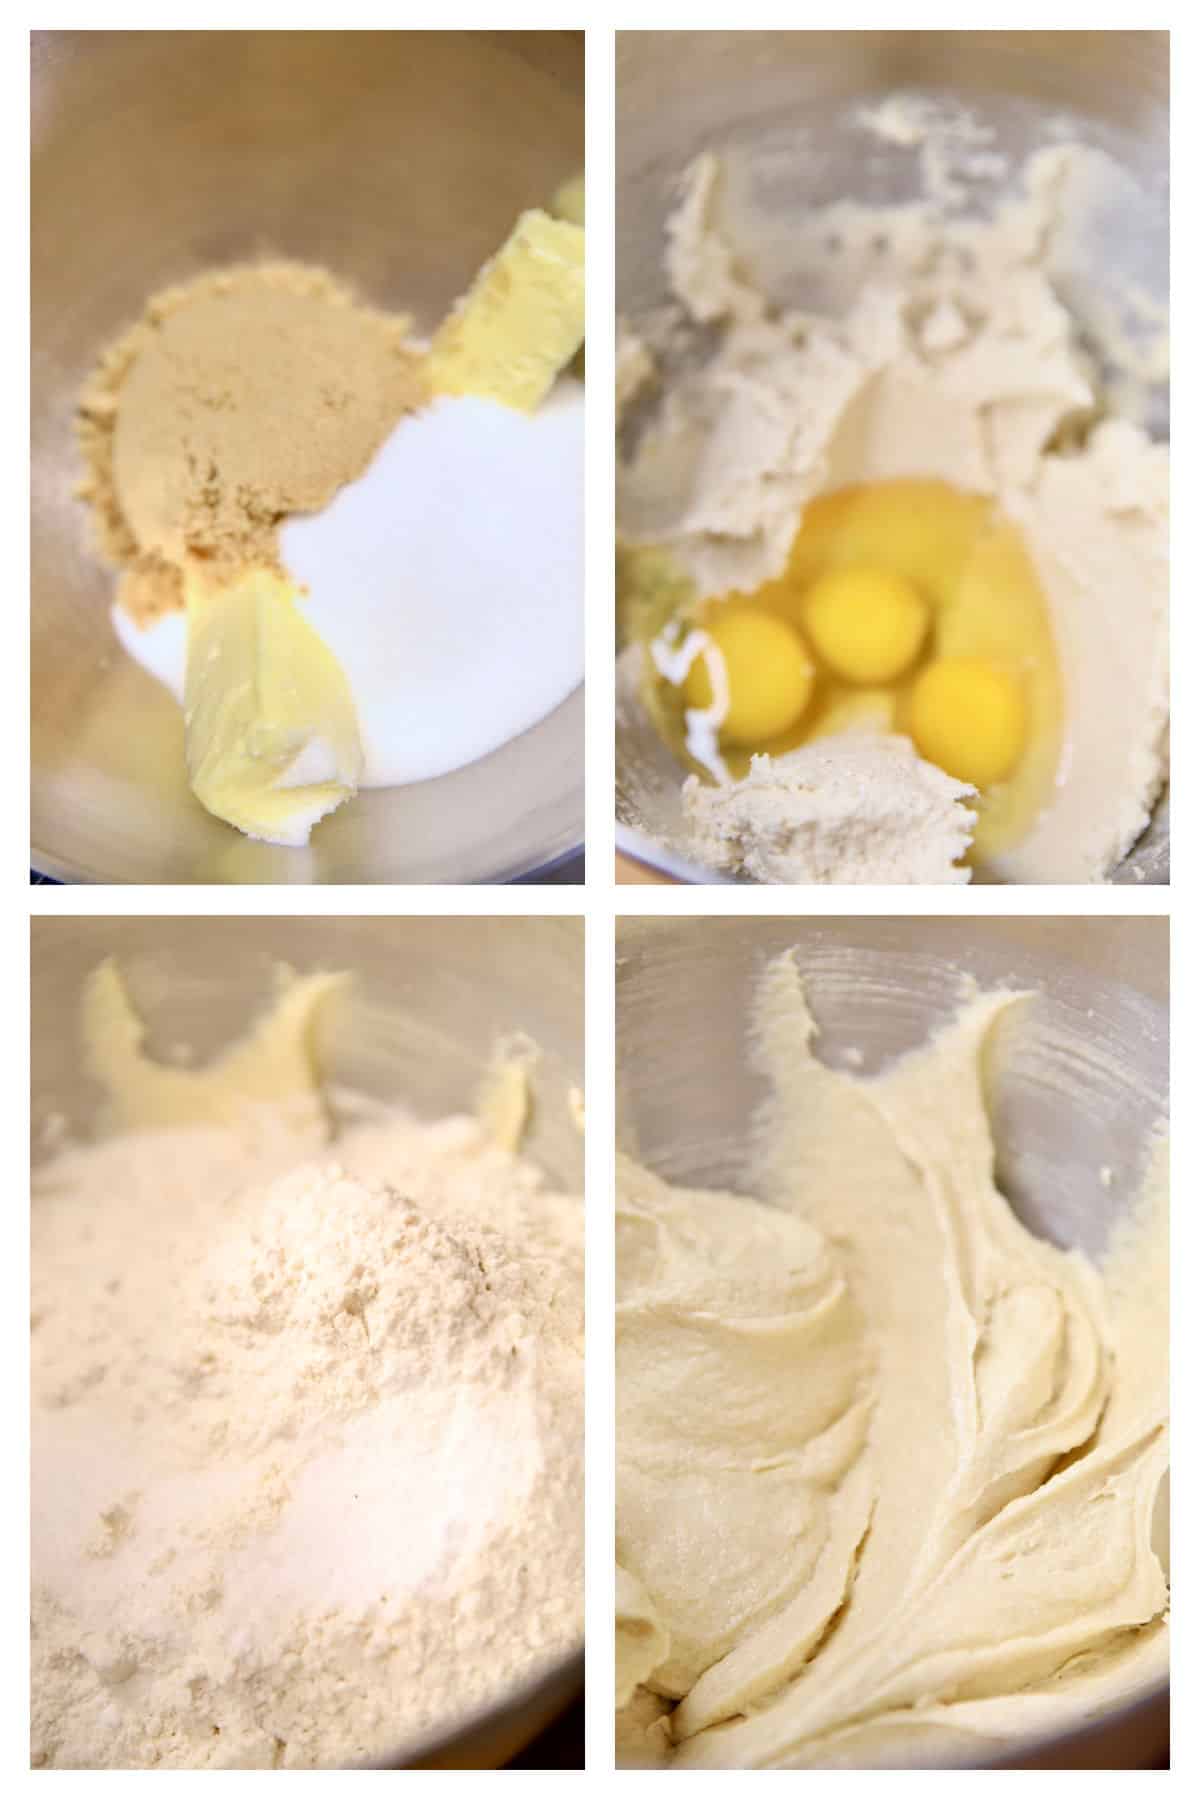 Making cookie dough collage.